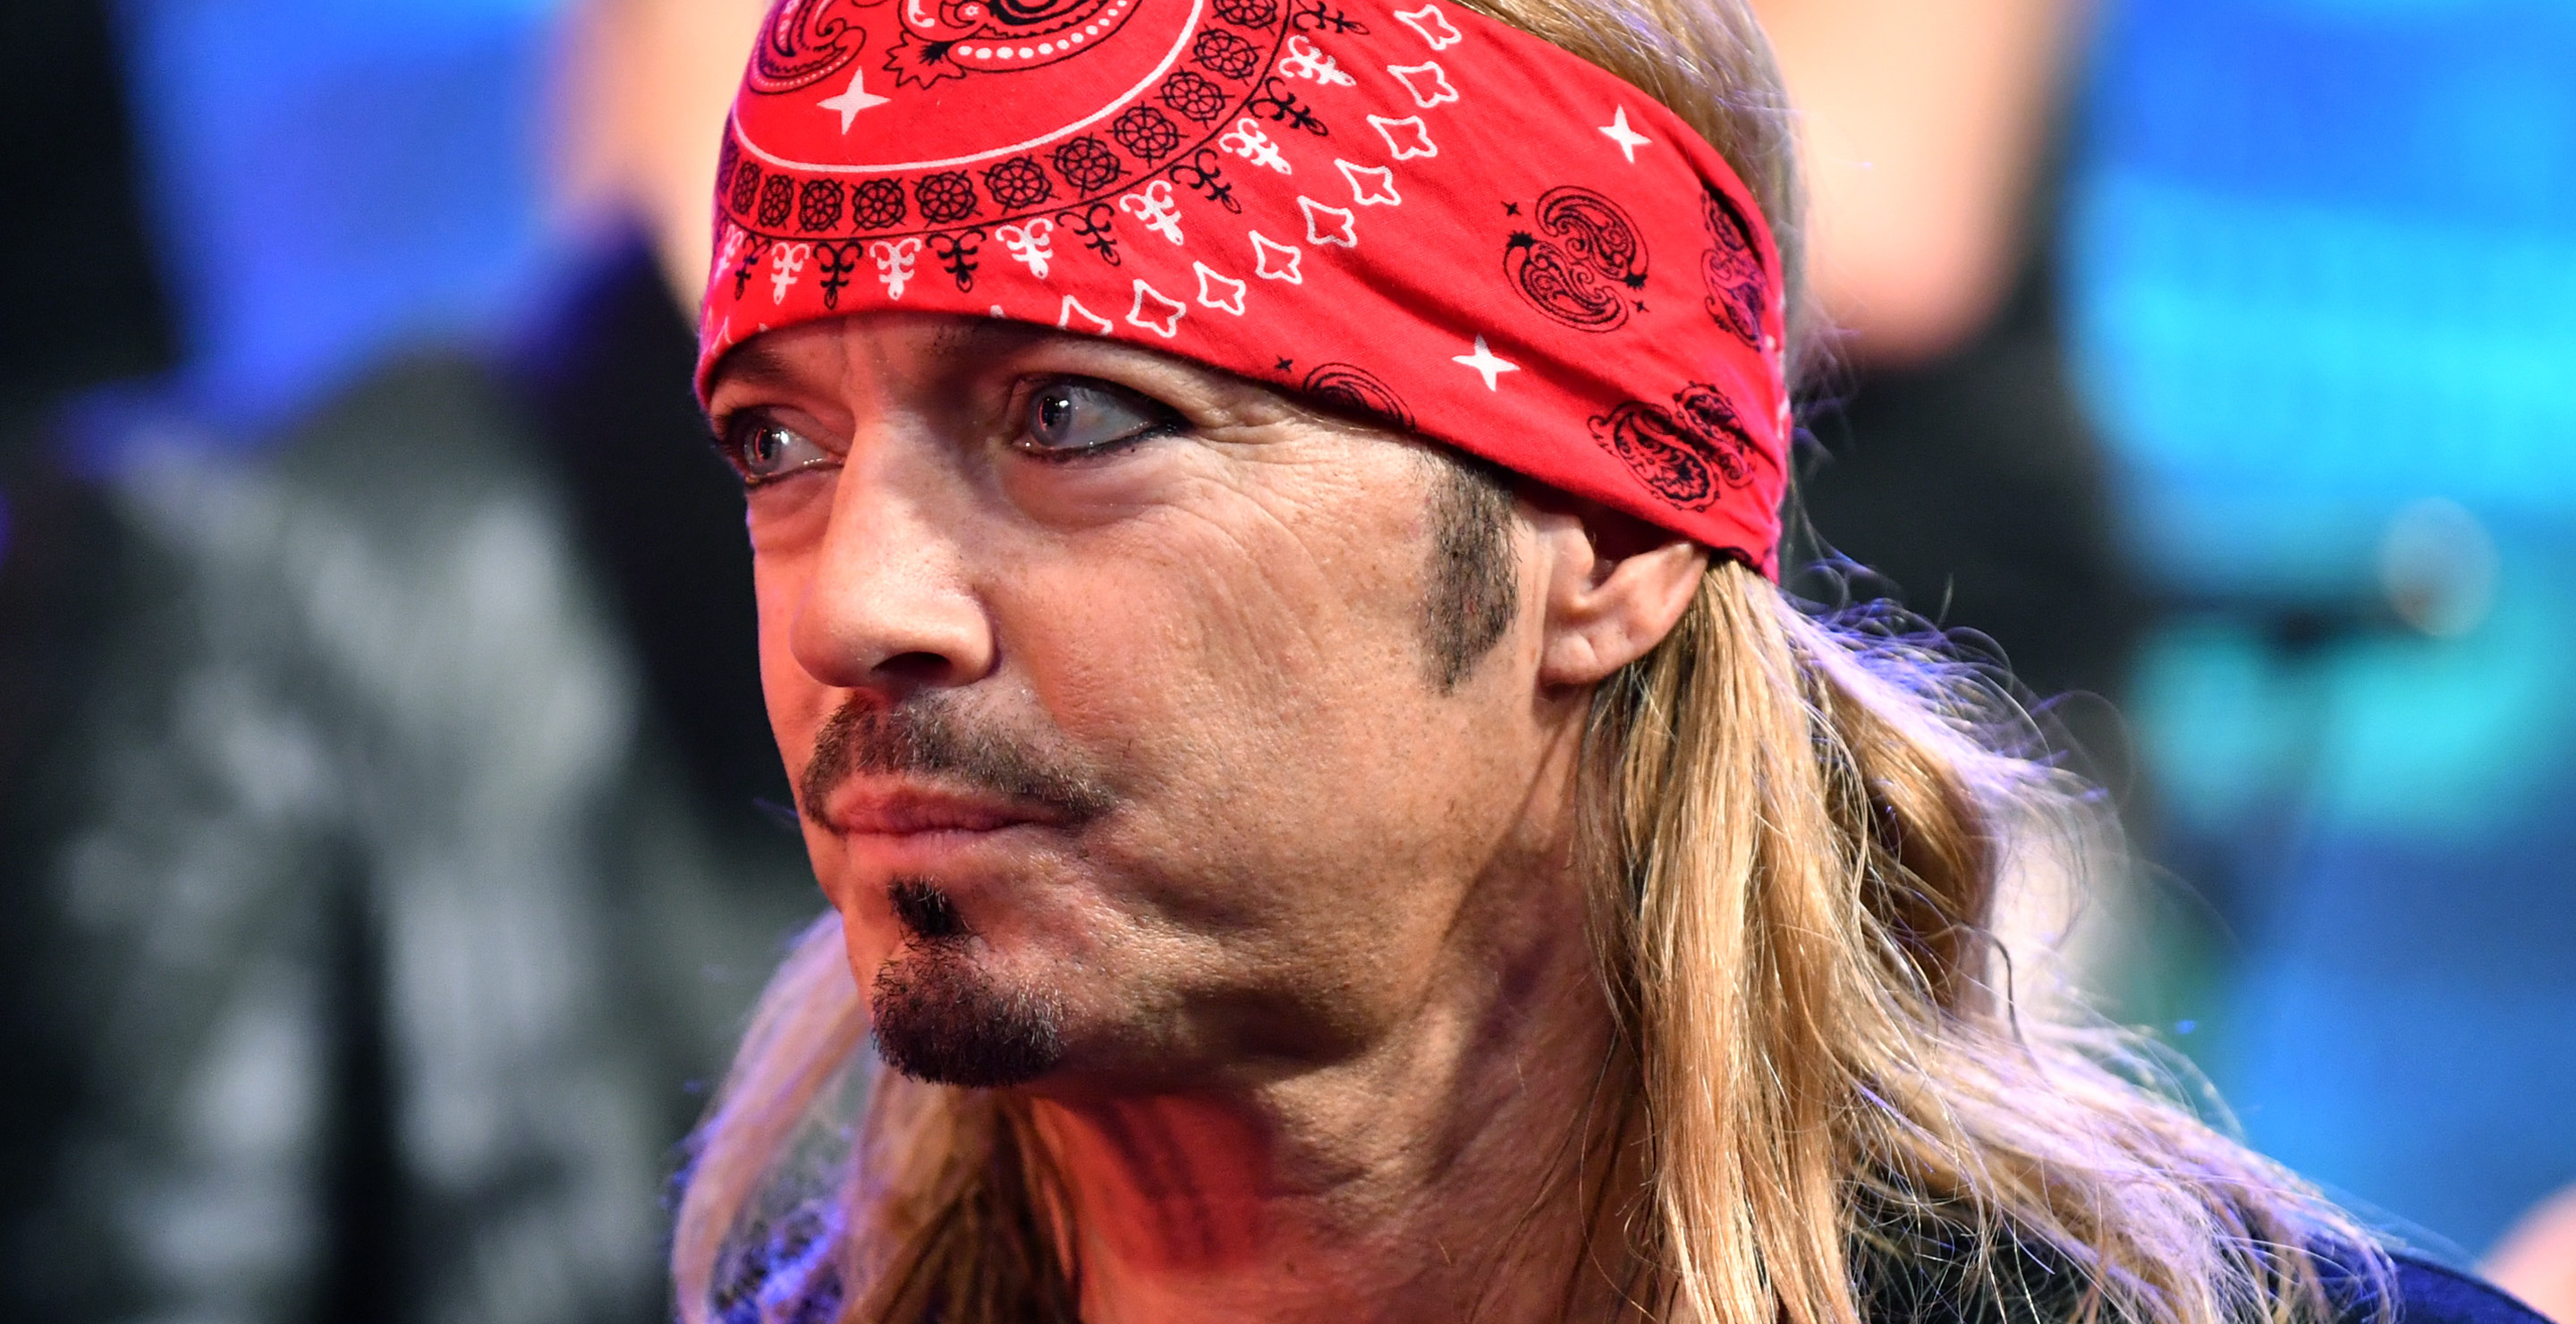 Brett Michaels Would Have Been A Longhaul Trucker If His Music Didn't Take Off